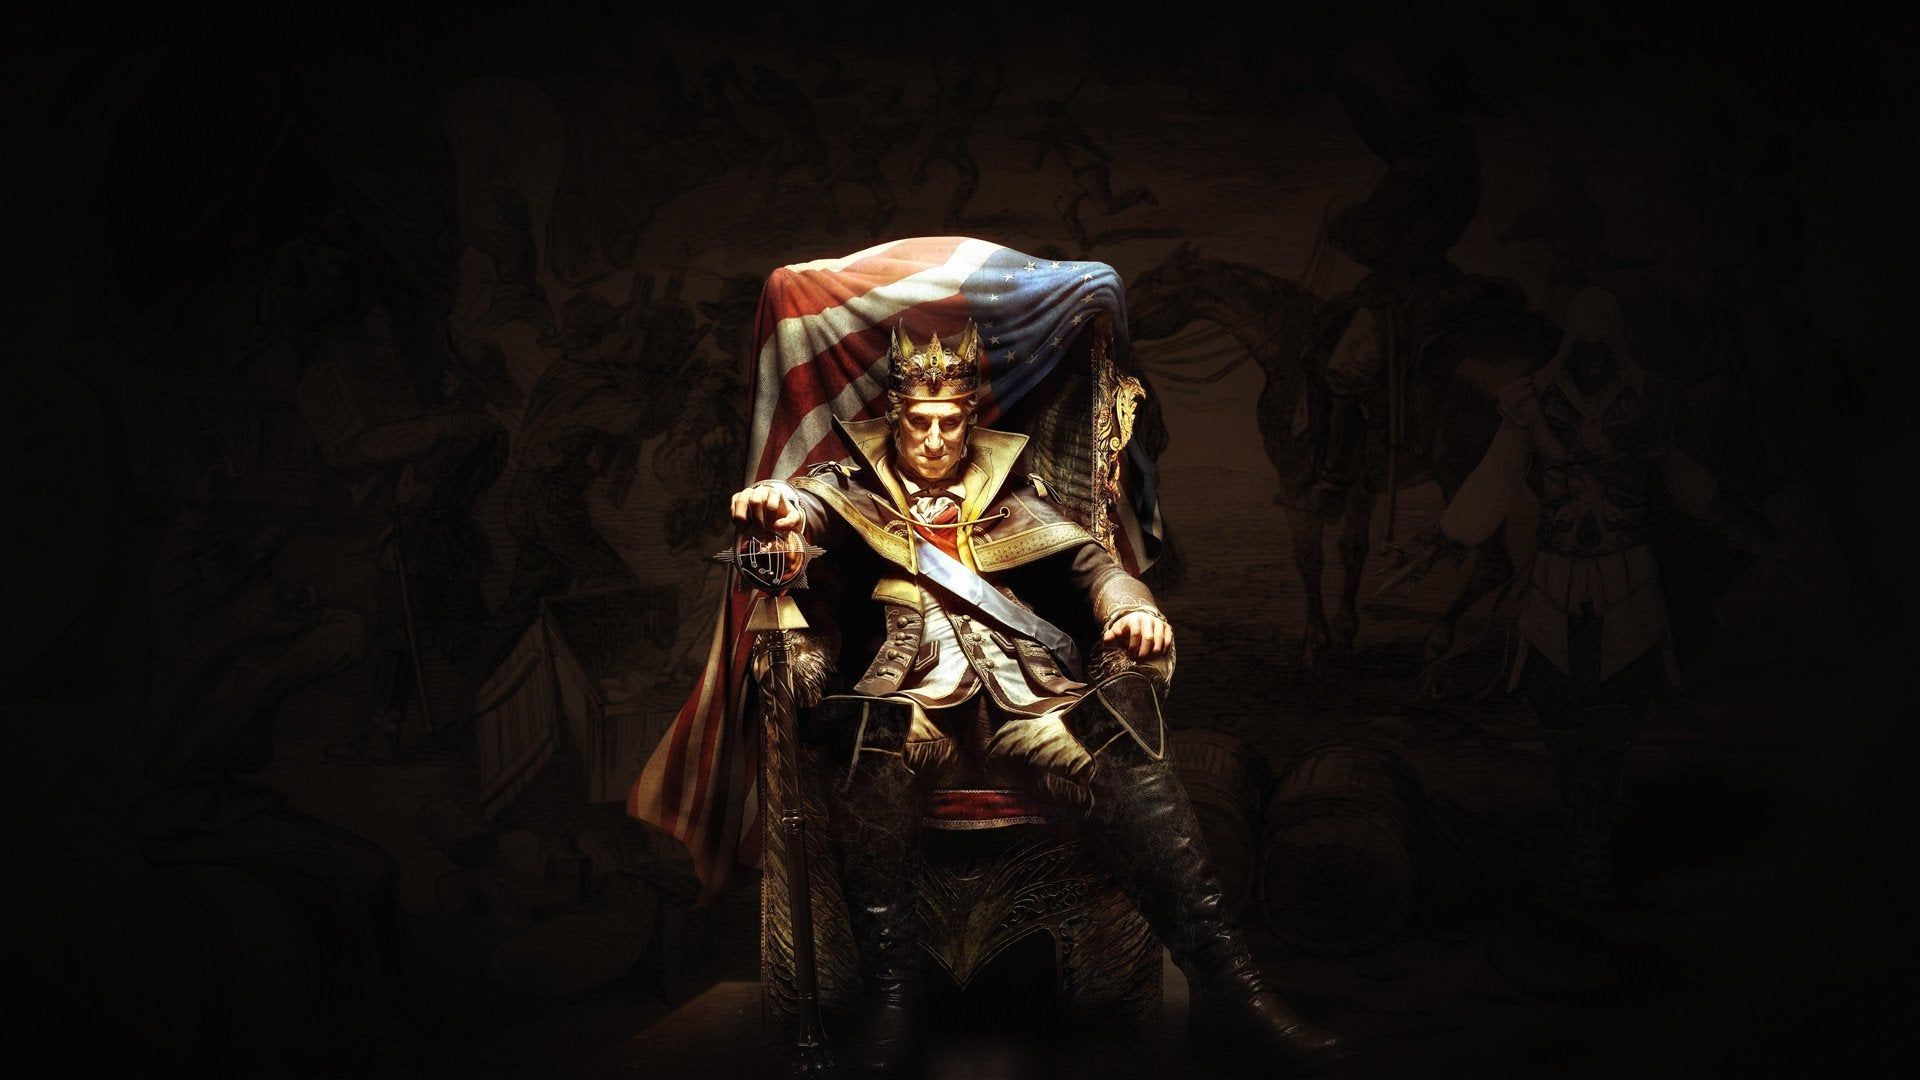 Made a wallpaper of evil George Washington for my desktop, maybe